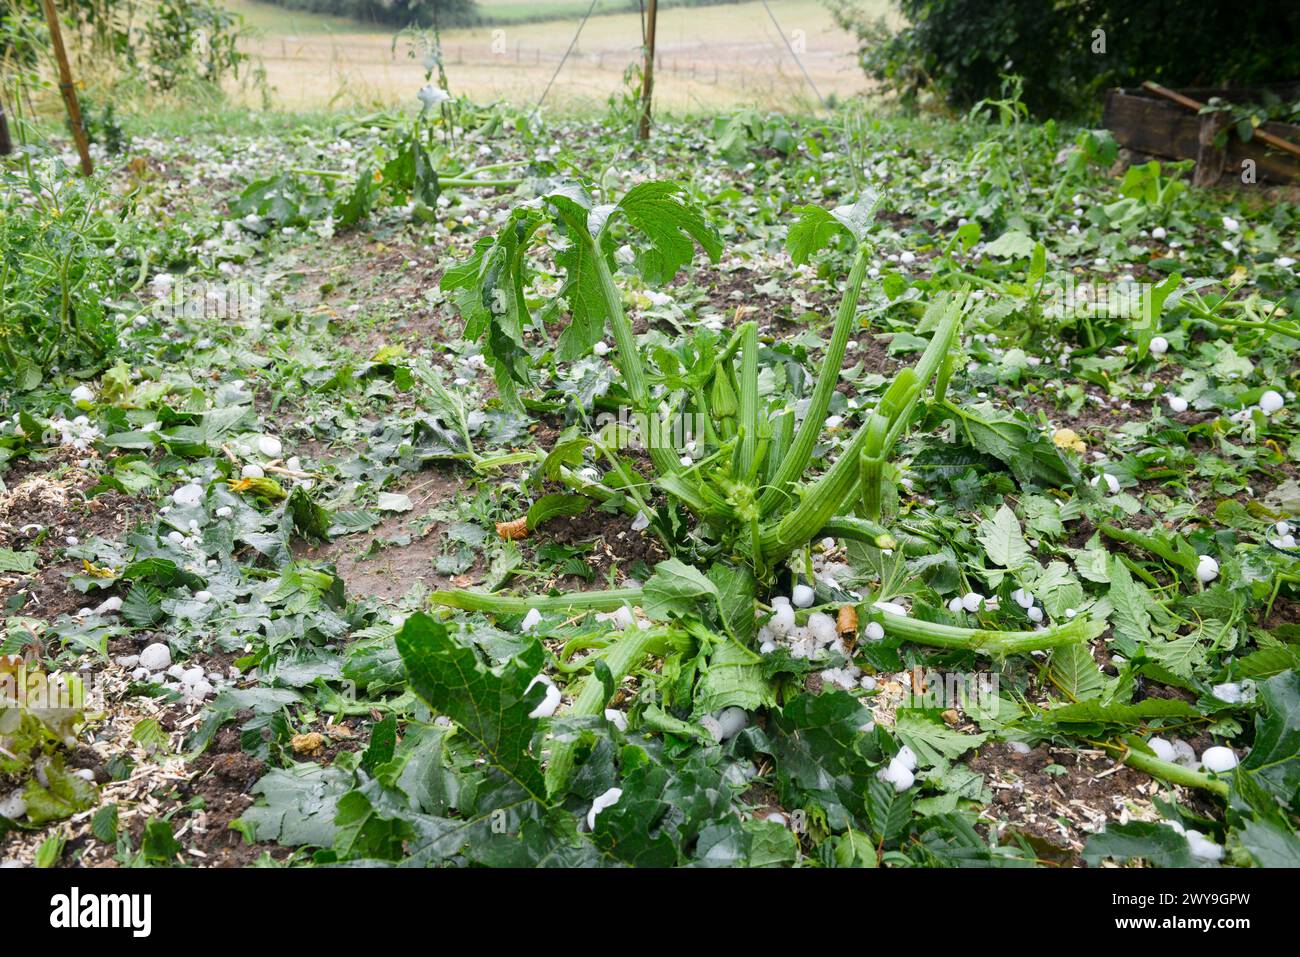 A hailstorm damaged all the crops in the vegetable garden Stock Photo